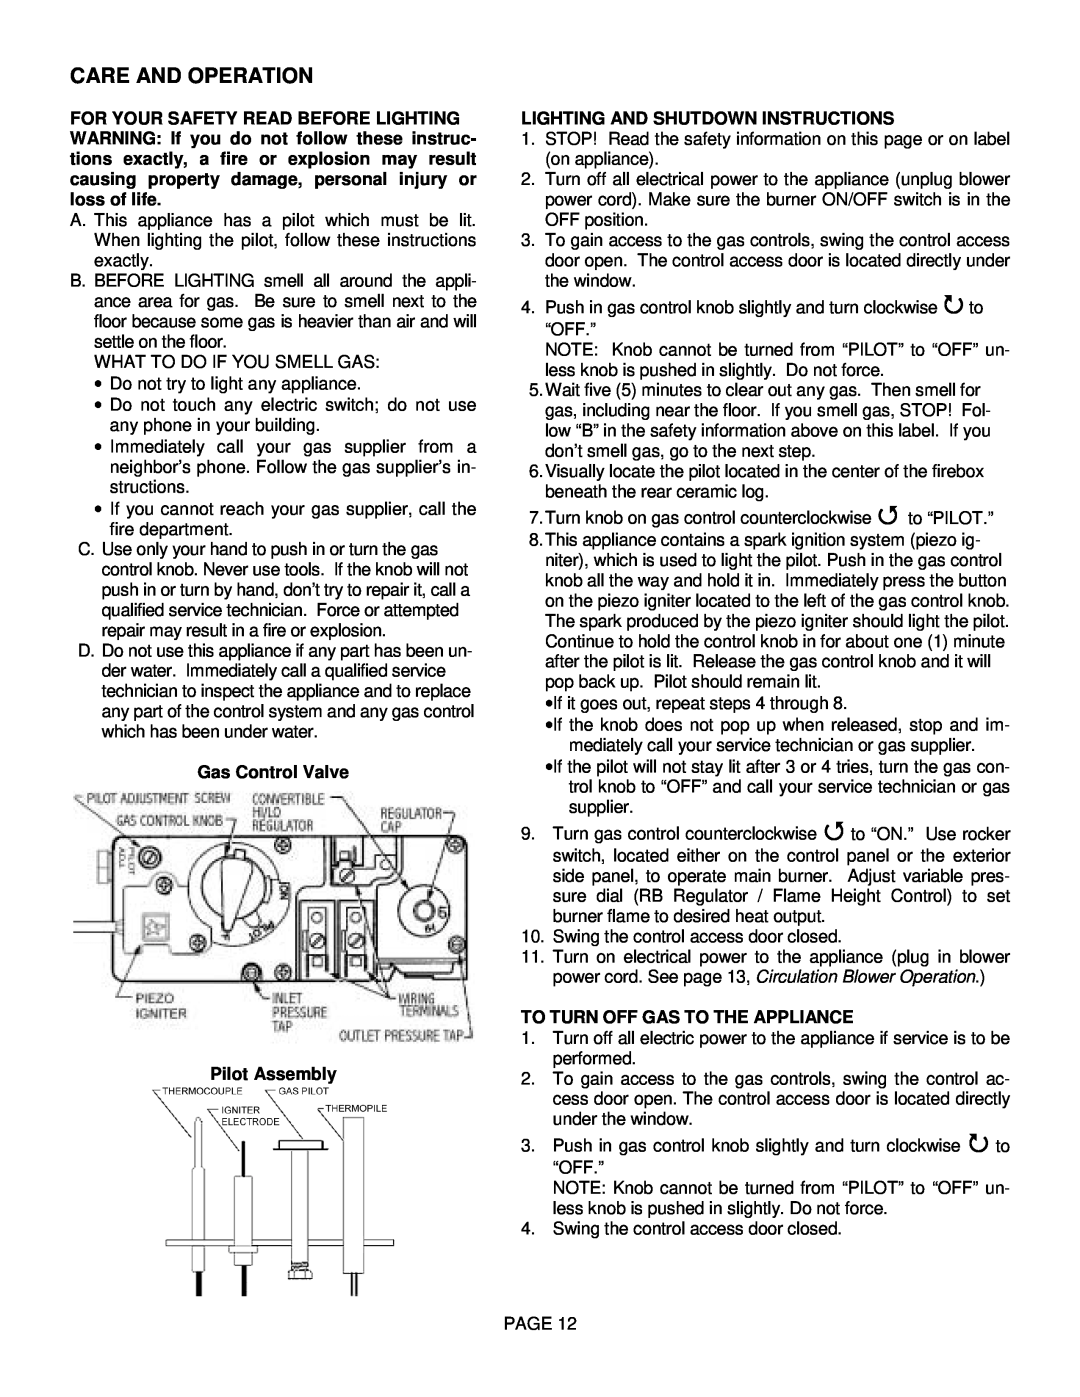 Lenoxx Electronics L30 BF-2 Care And Operation, Gas Control Valve Pilot Assembly, Lighting And Shutdown Instructions 